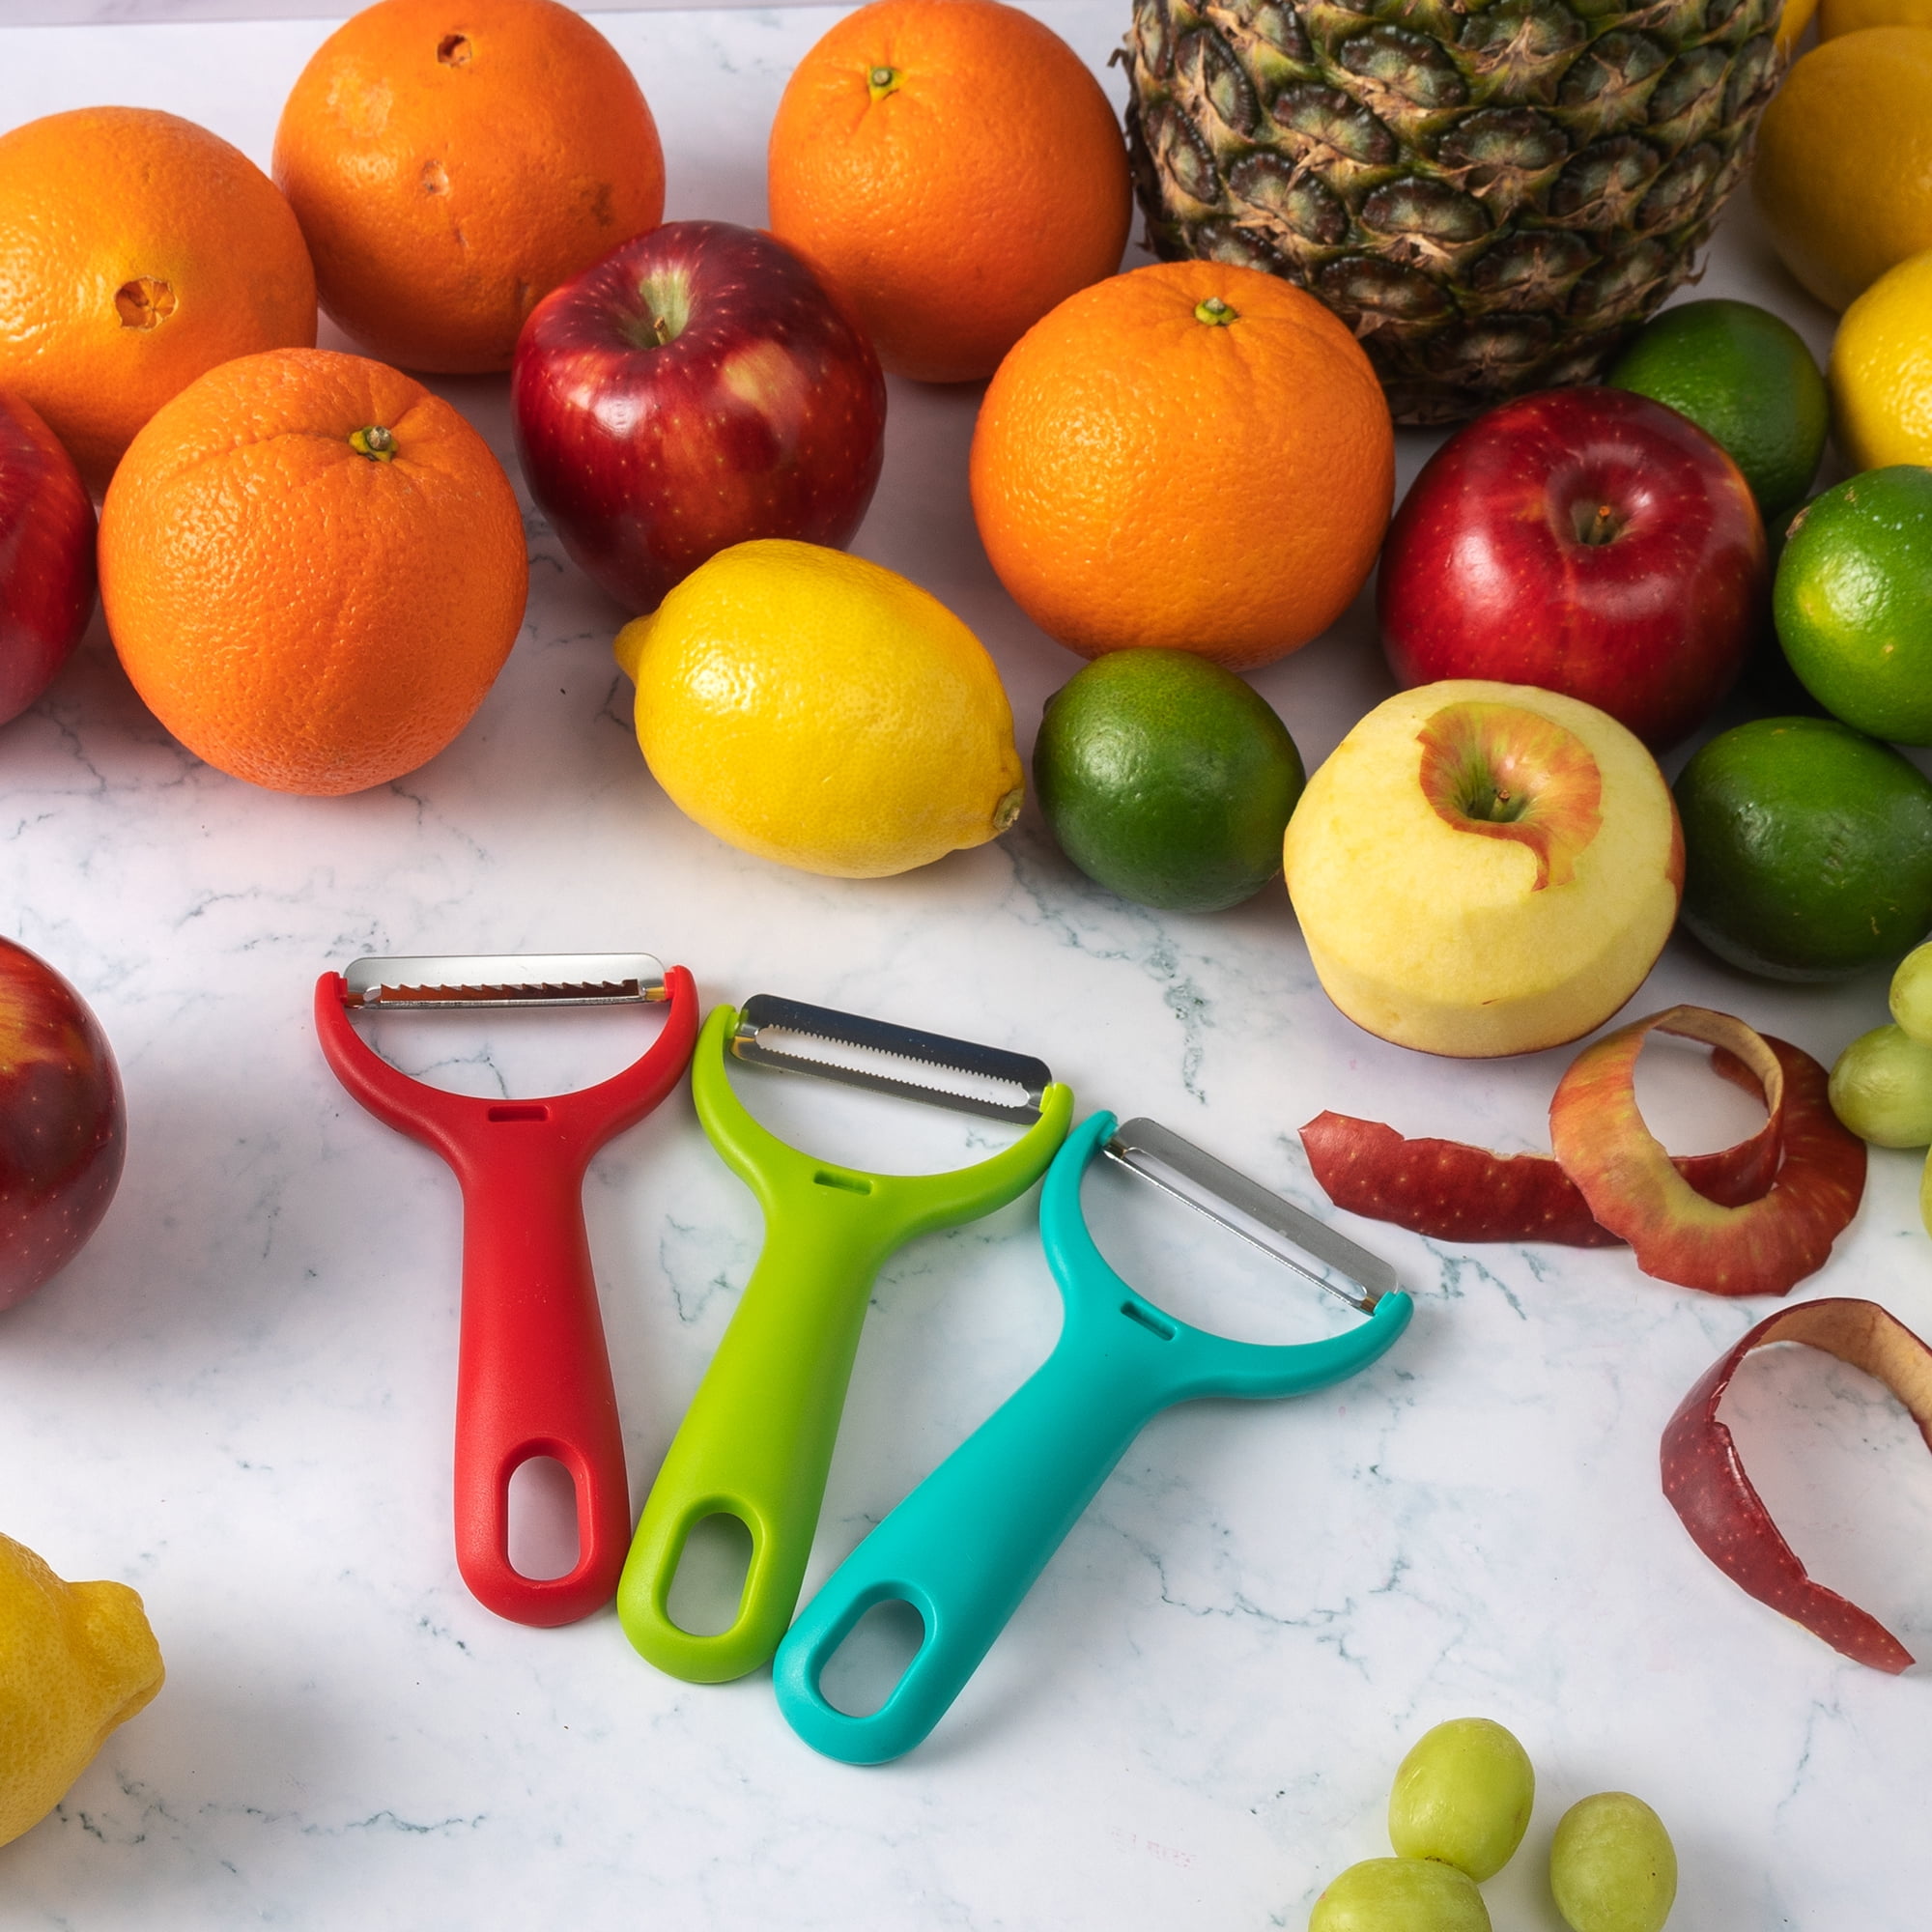 KitchenAid Universal 3-Piece Peeler Set in Assorted Colors